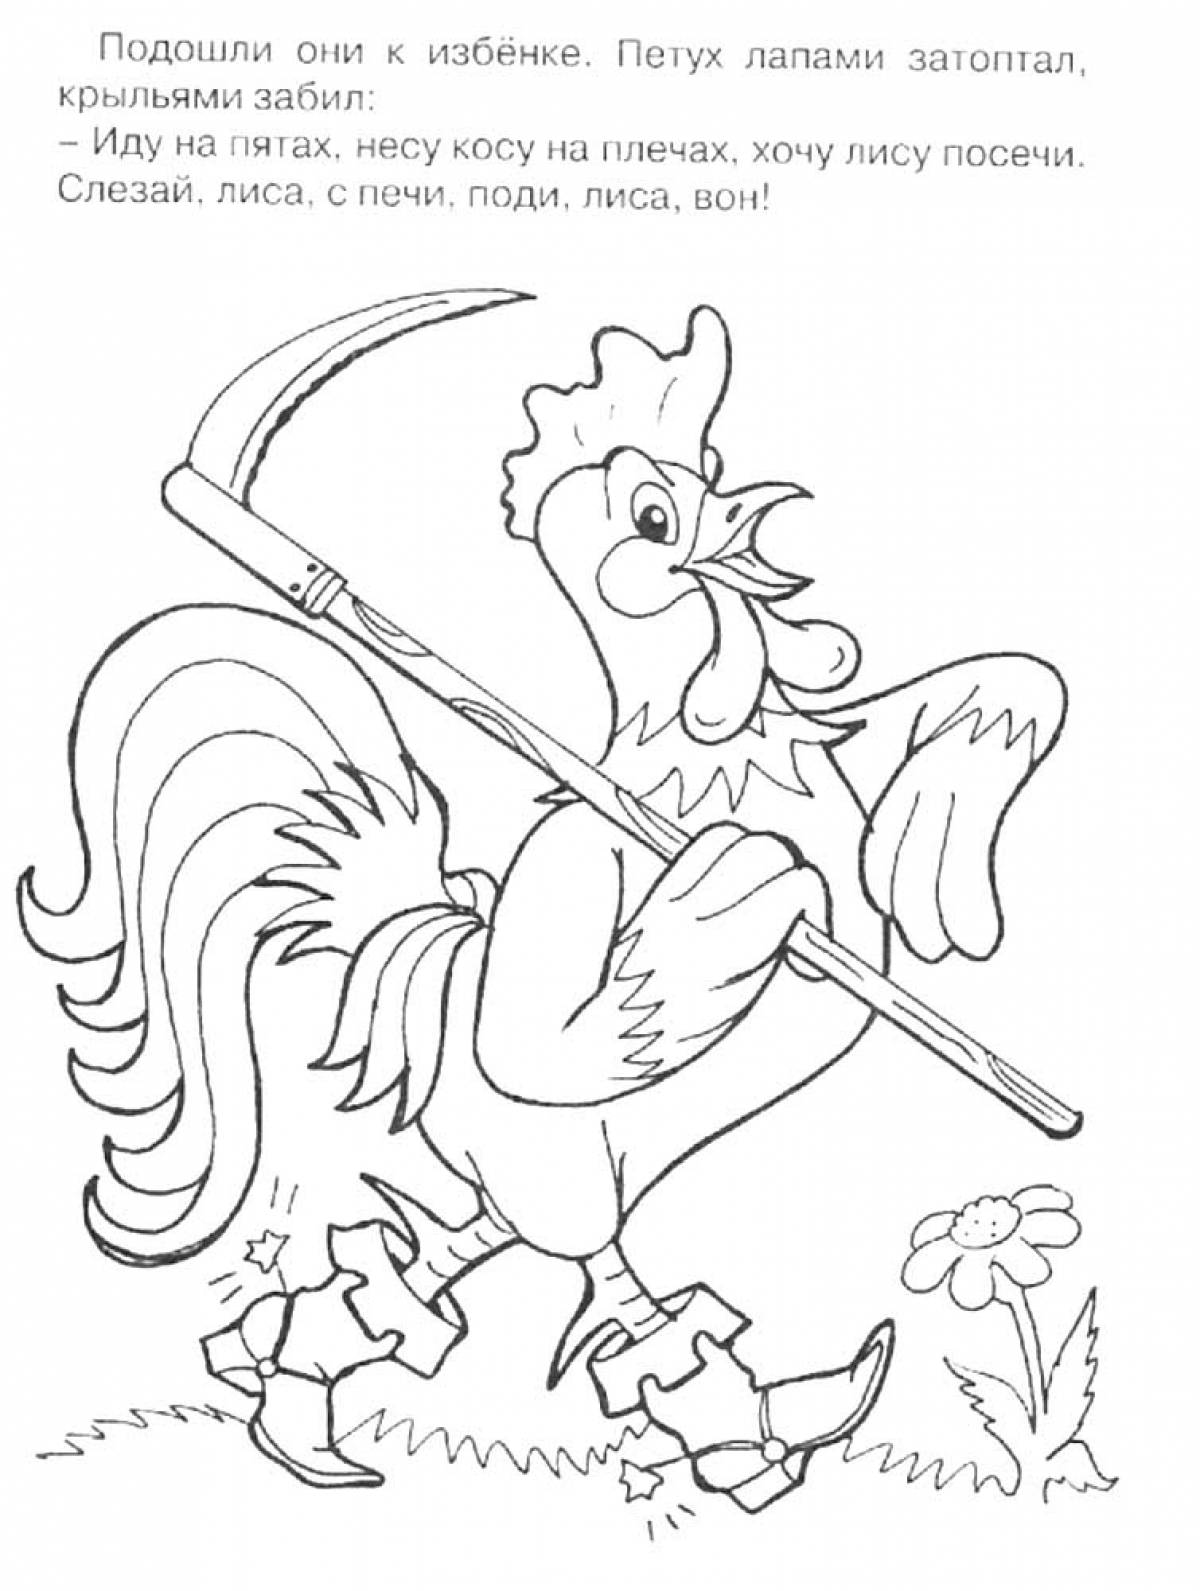 Rooster with a scythe